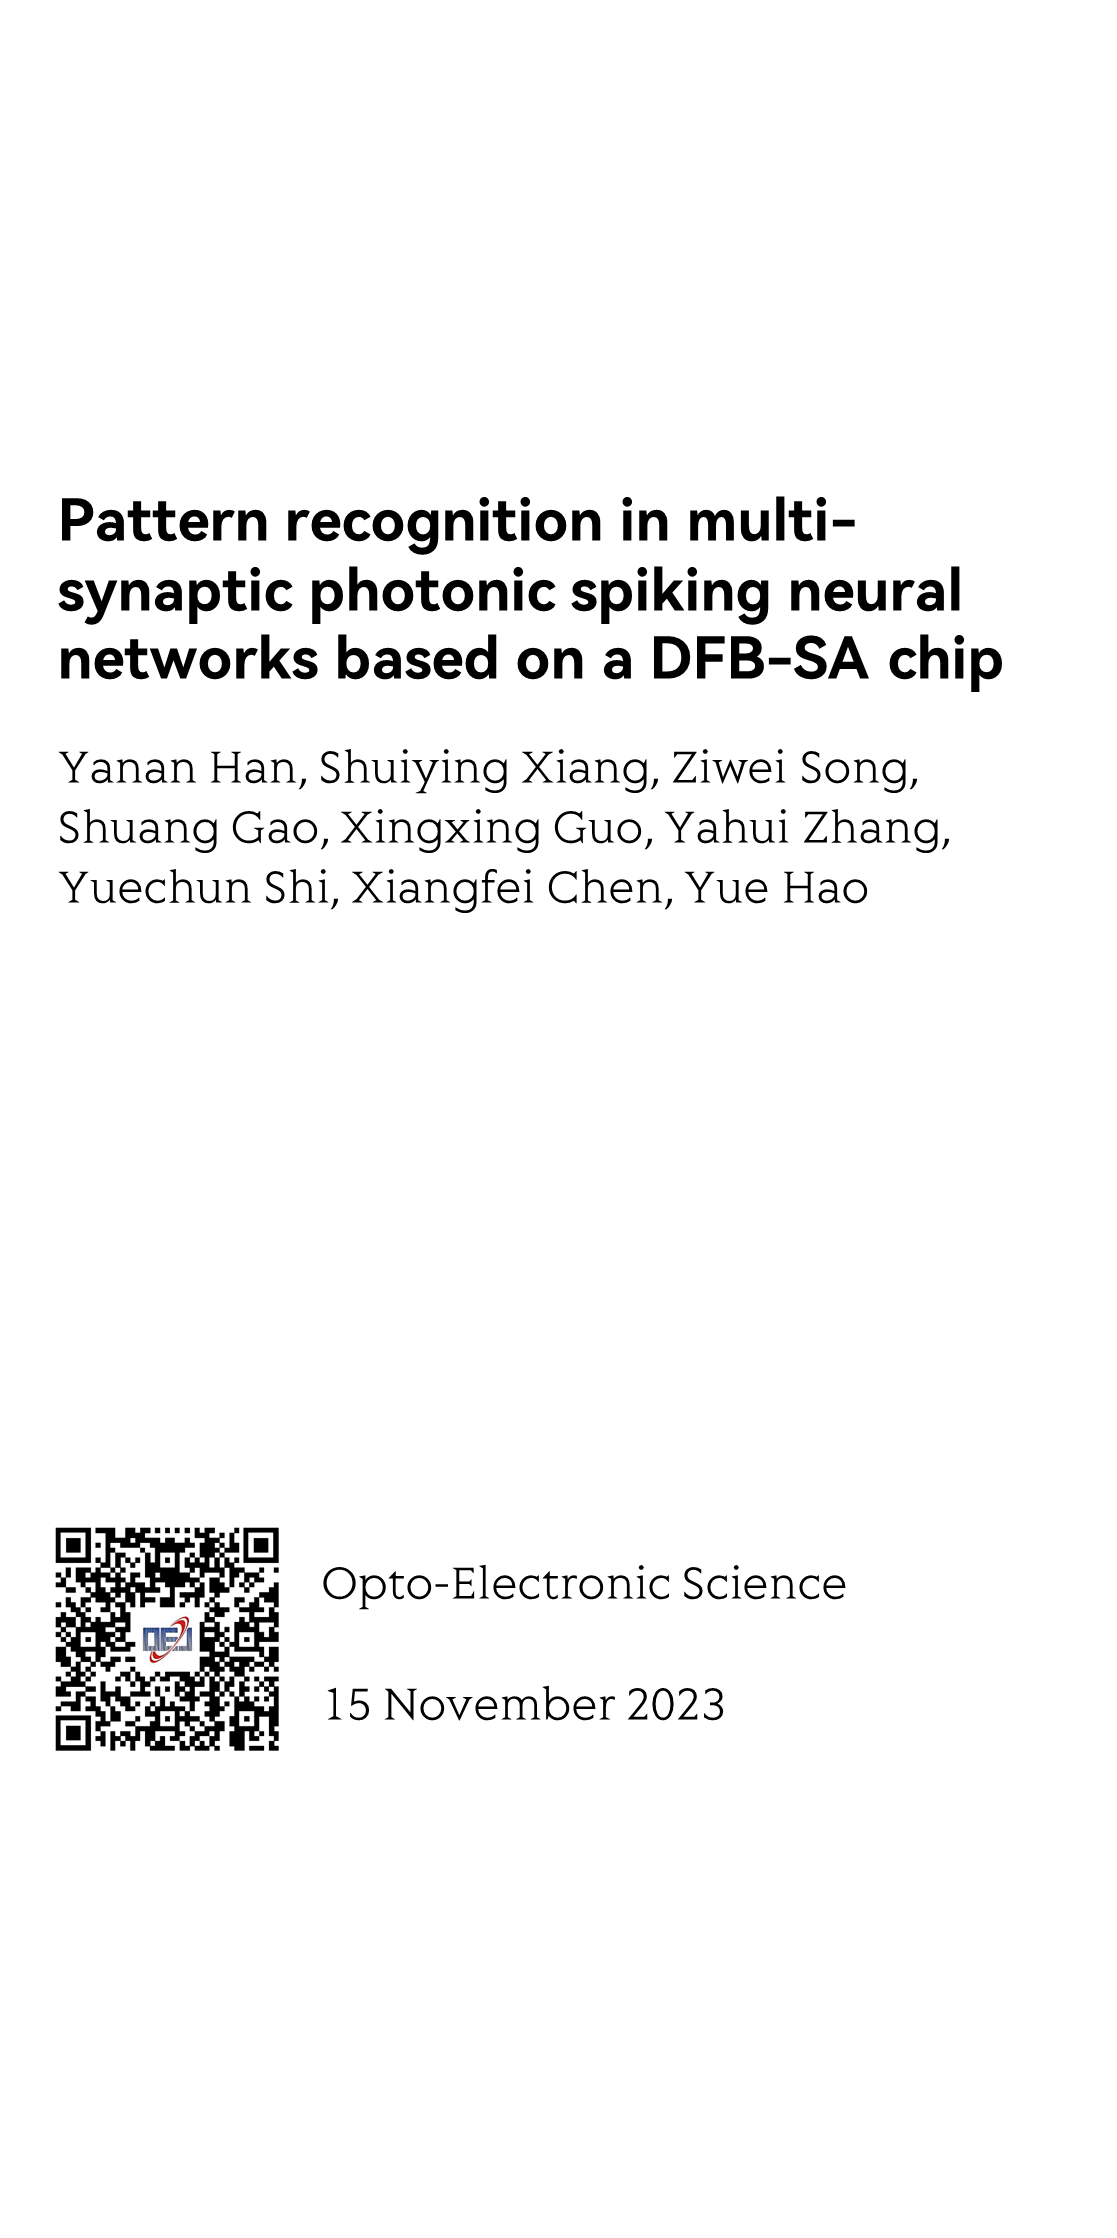 Pattern recognition in multi-synaptic photonic spiking neural networks based on a DFB-SA chip_1